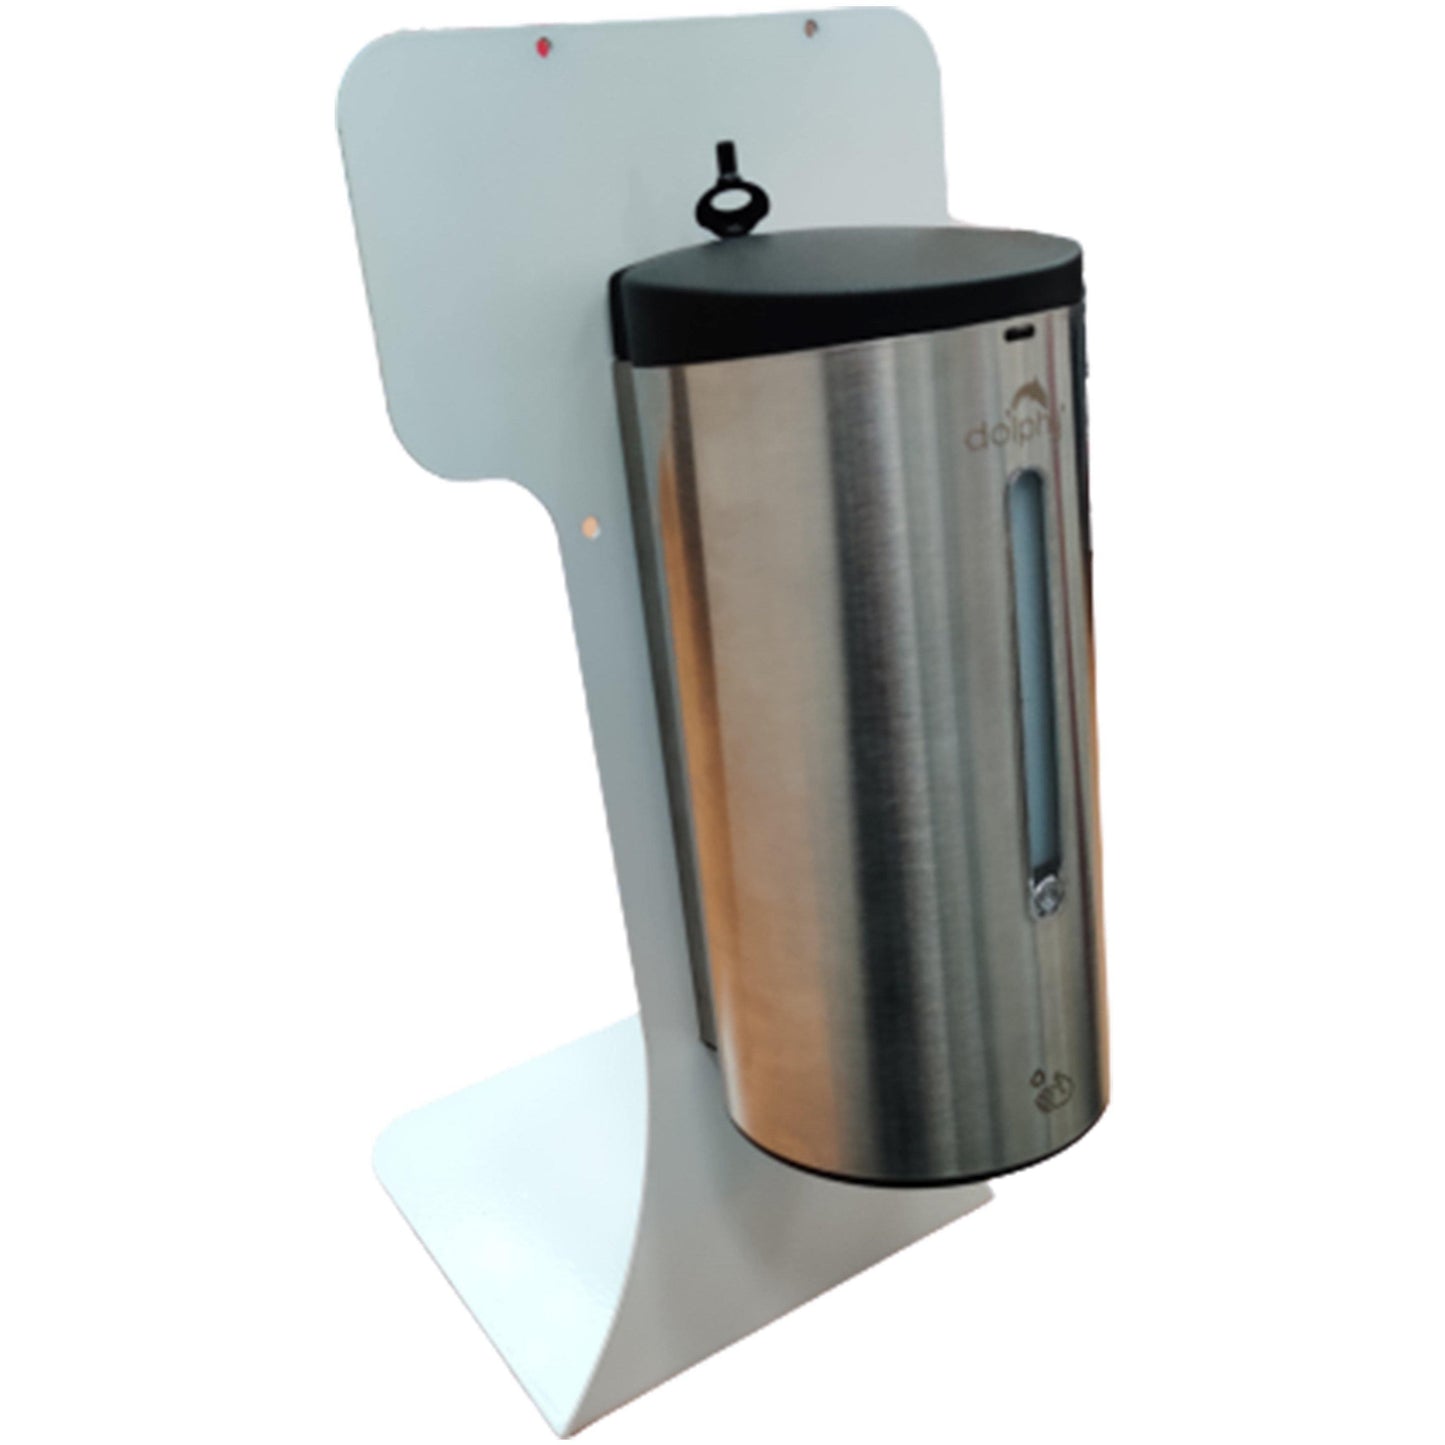 Stainless Steel Automatic Hand Sanitiser Dispenser with Desk Stand - Office Furniture Company 